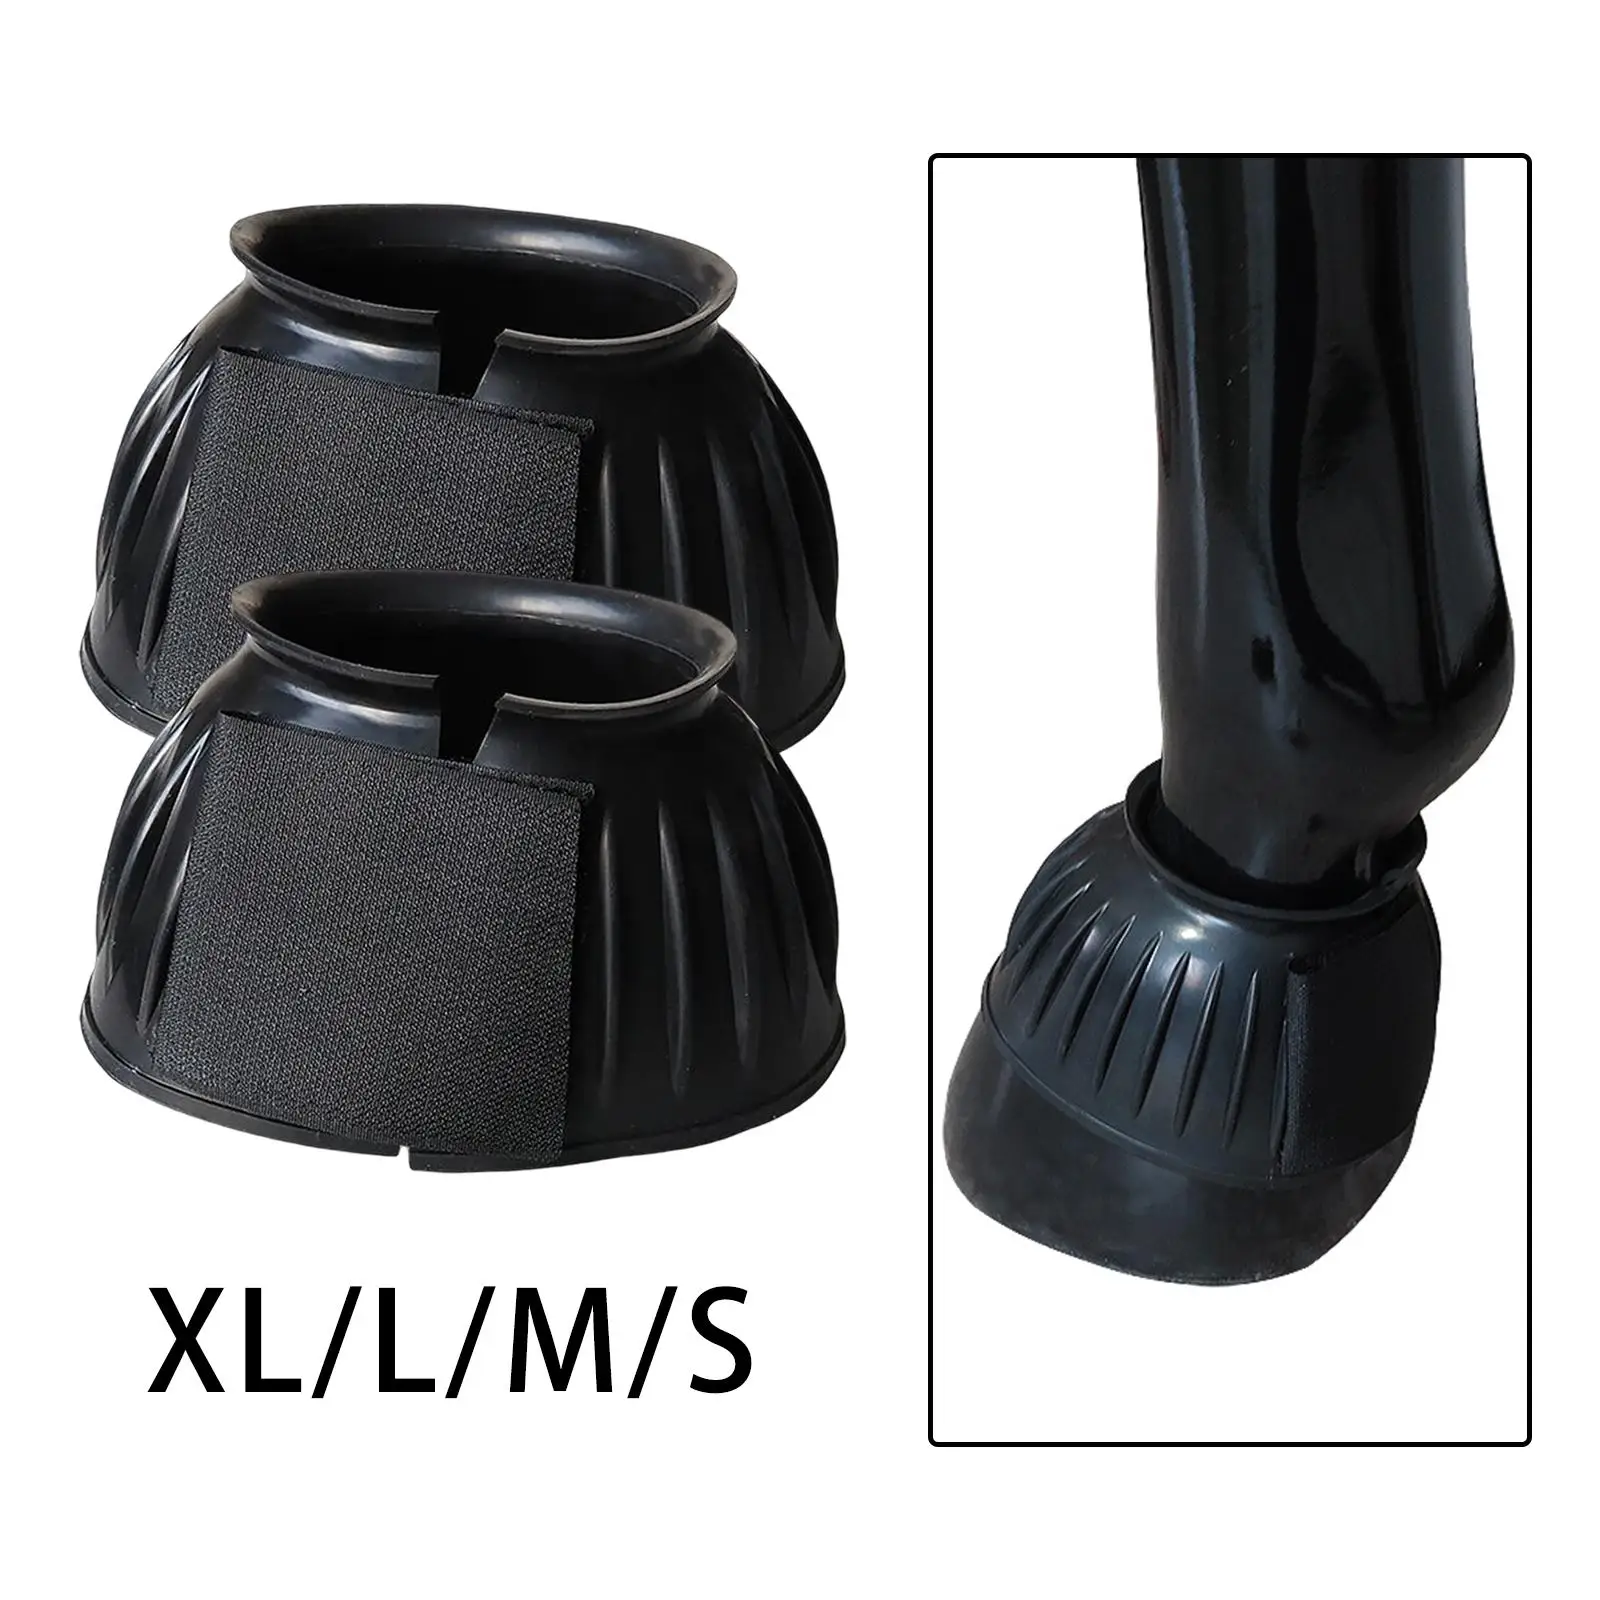 Overtaking Bells for Horses Protection Equestrian Accessories